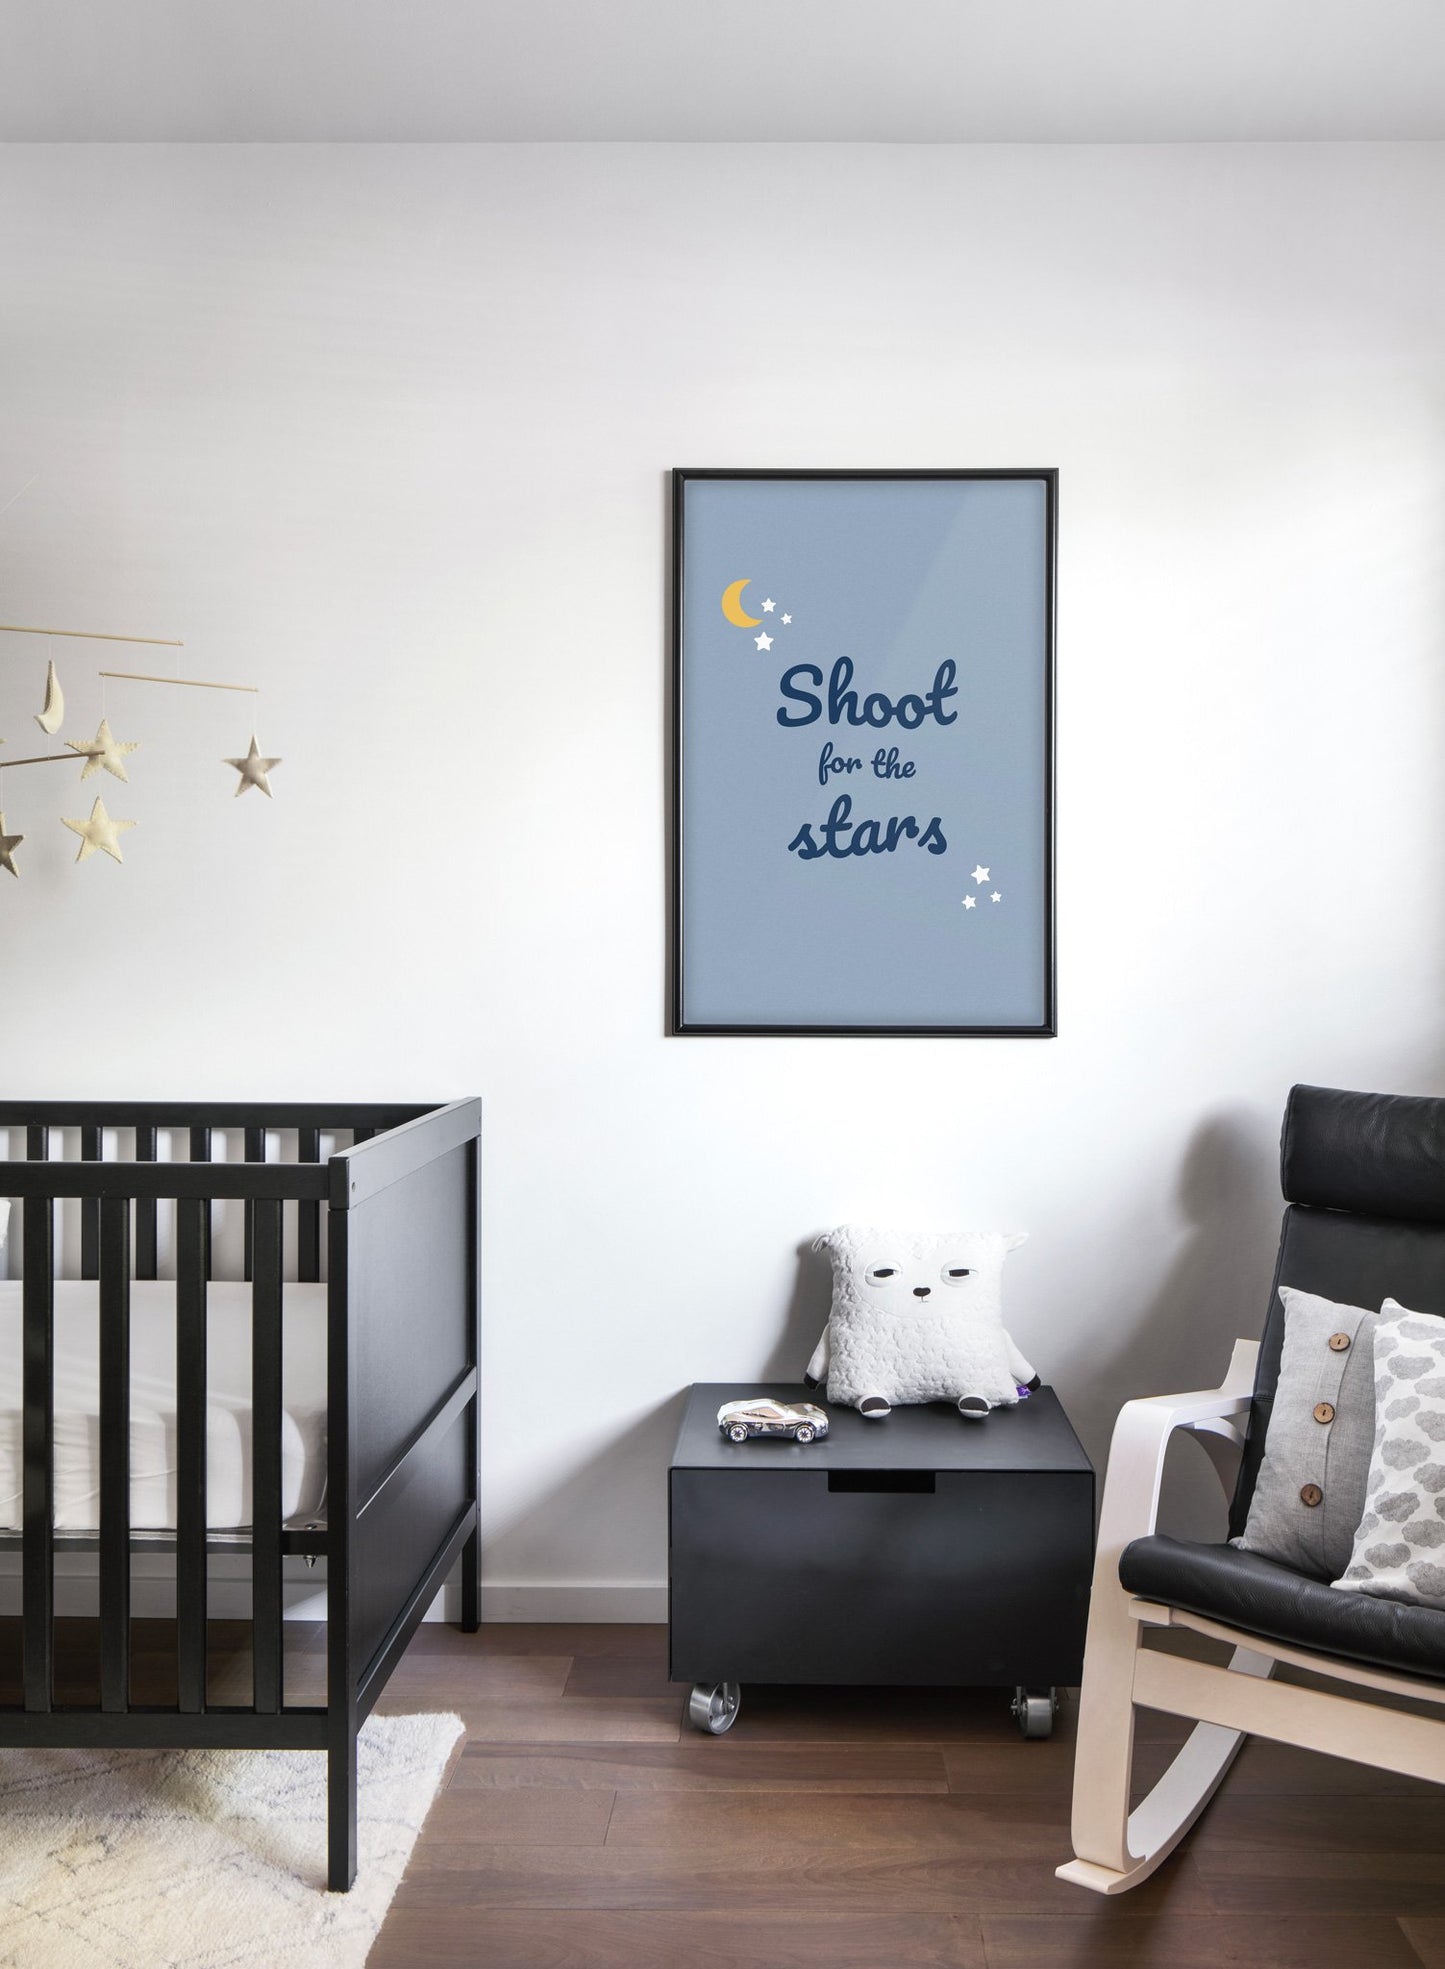 Modern minimalist poster by Opposite Wall with shoot for the stars quote - kids collection - nursery